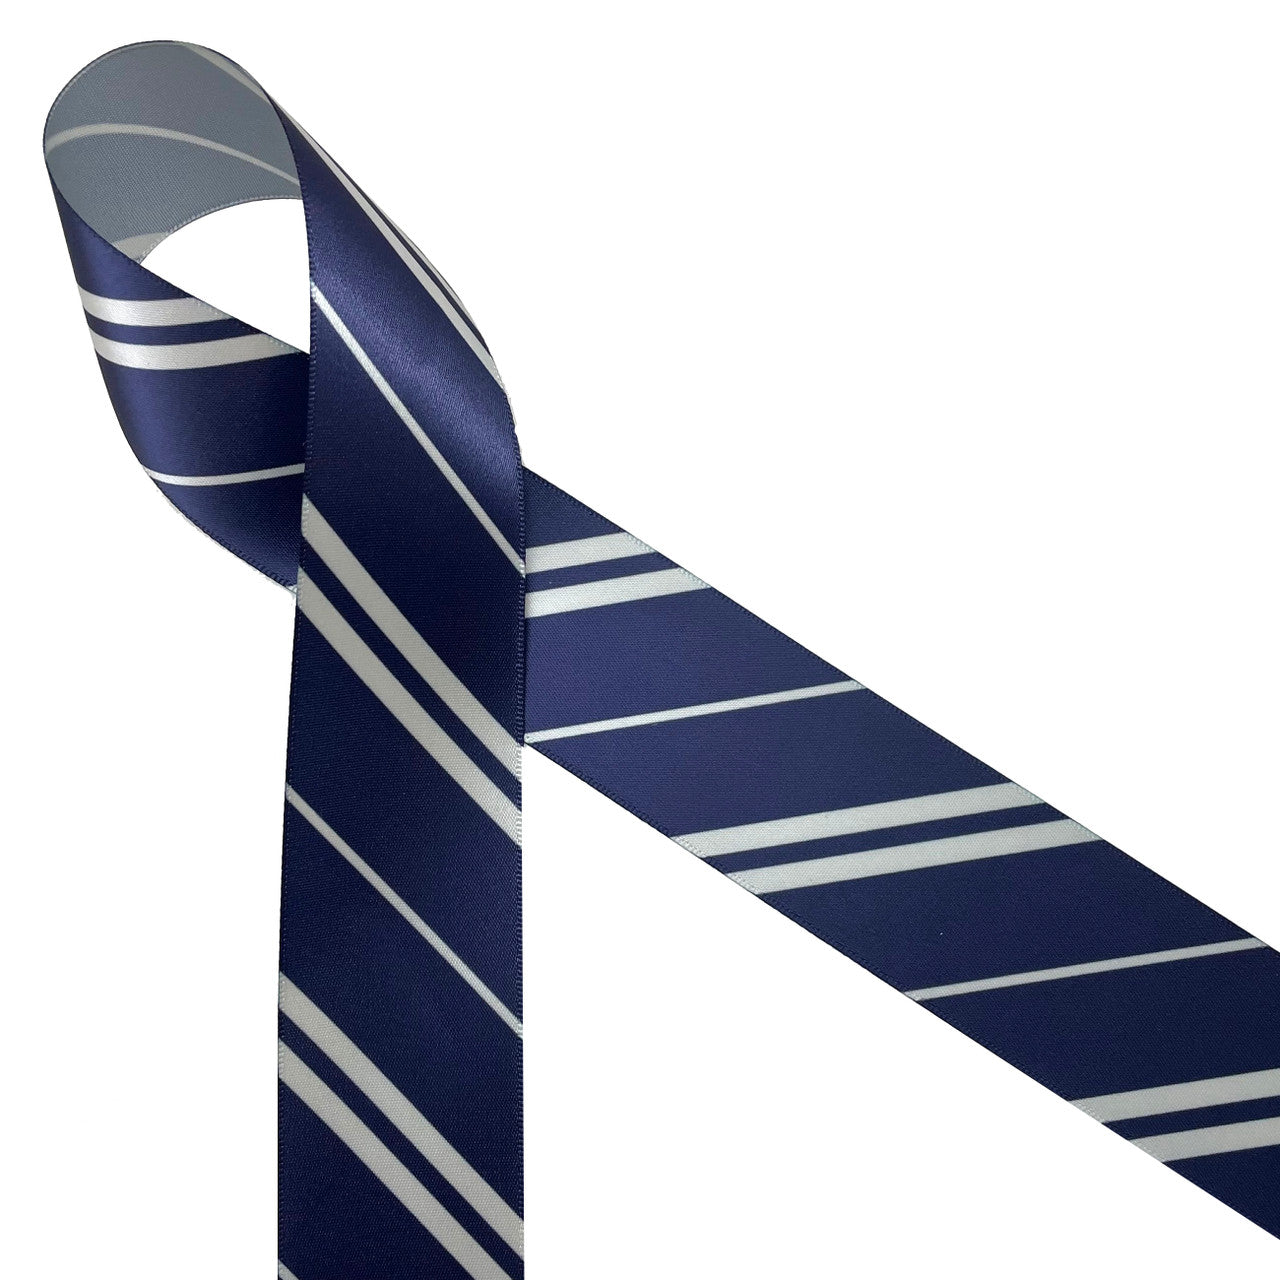 Ravenclaw wide and narrow stripes of gray and navy blue printed on 7/8" gray single face satin ribbon is an ideal addition to any Hogwarts themed party!  Use this ribbon for Christmas tree trim, party decor, gift wrap. gift baskets,. baby showers, crafts, sewing and quilting projects too. All our ribbon is designed and printed in the USA